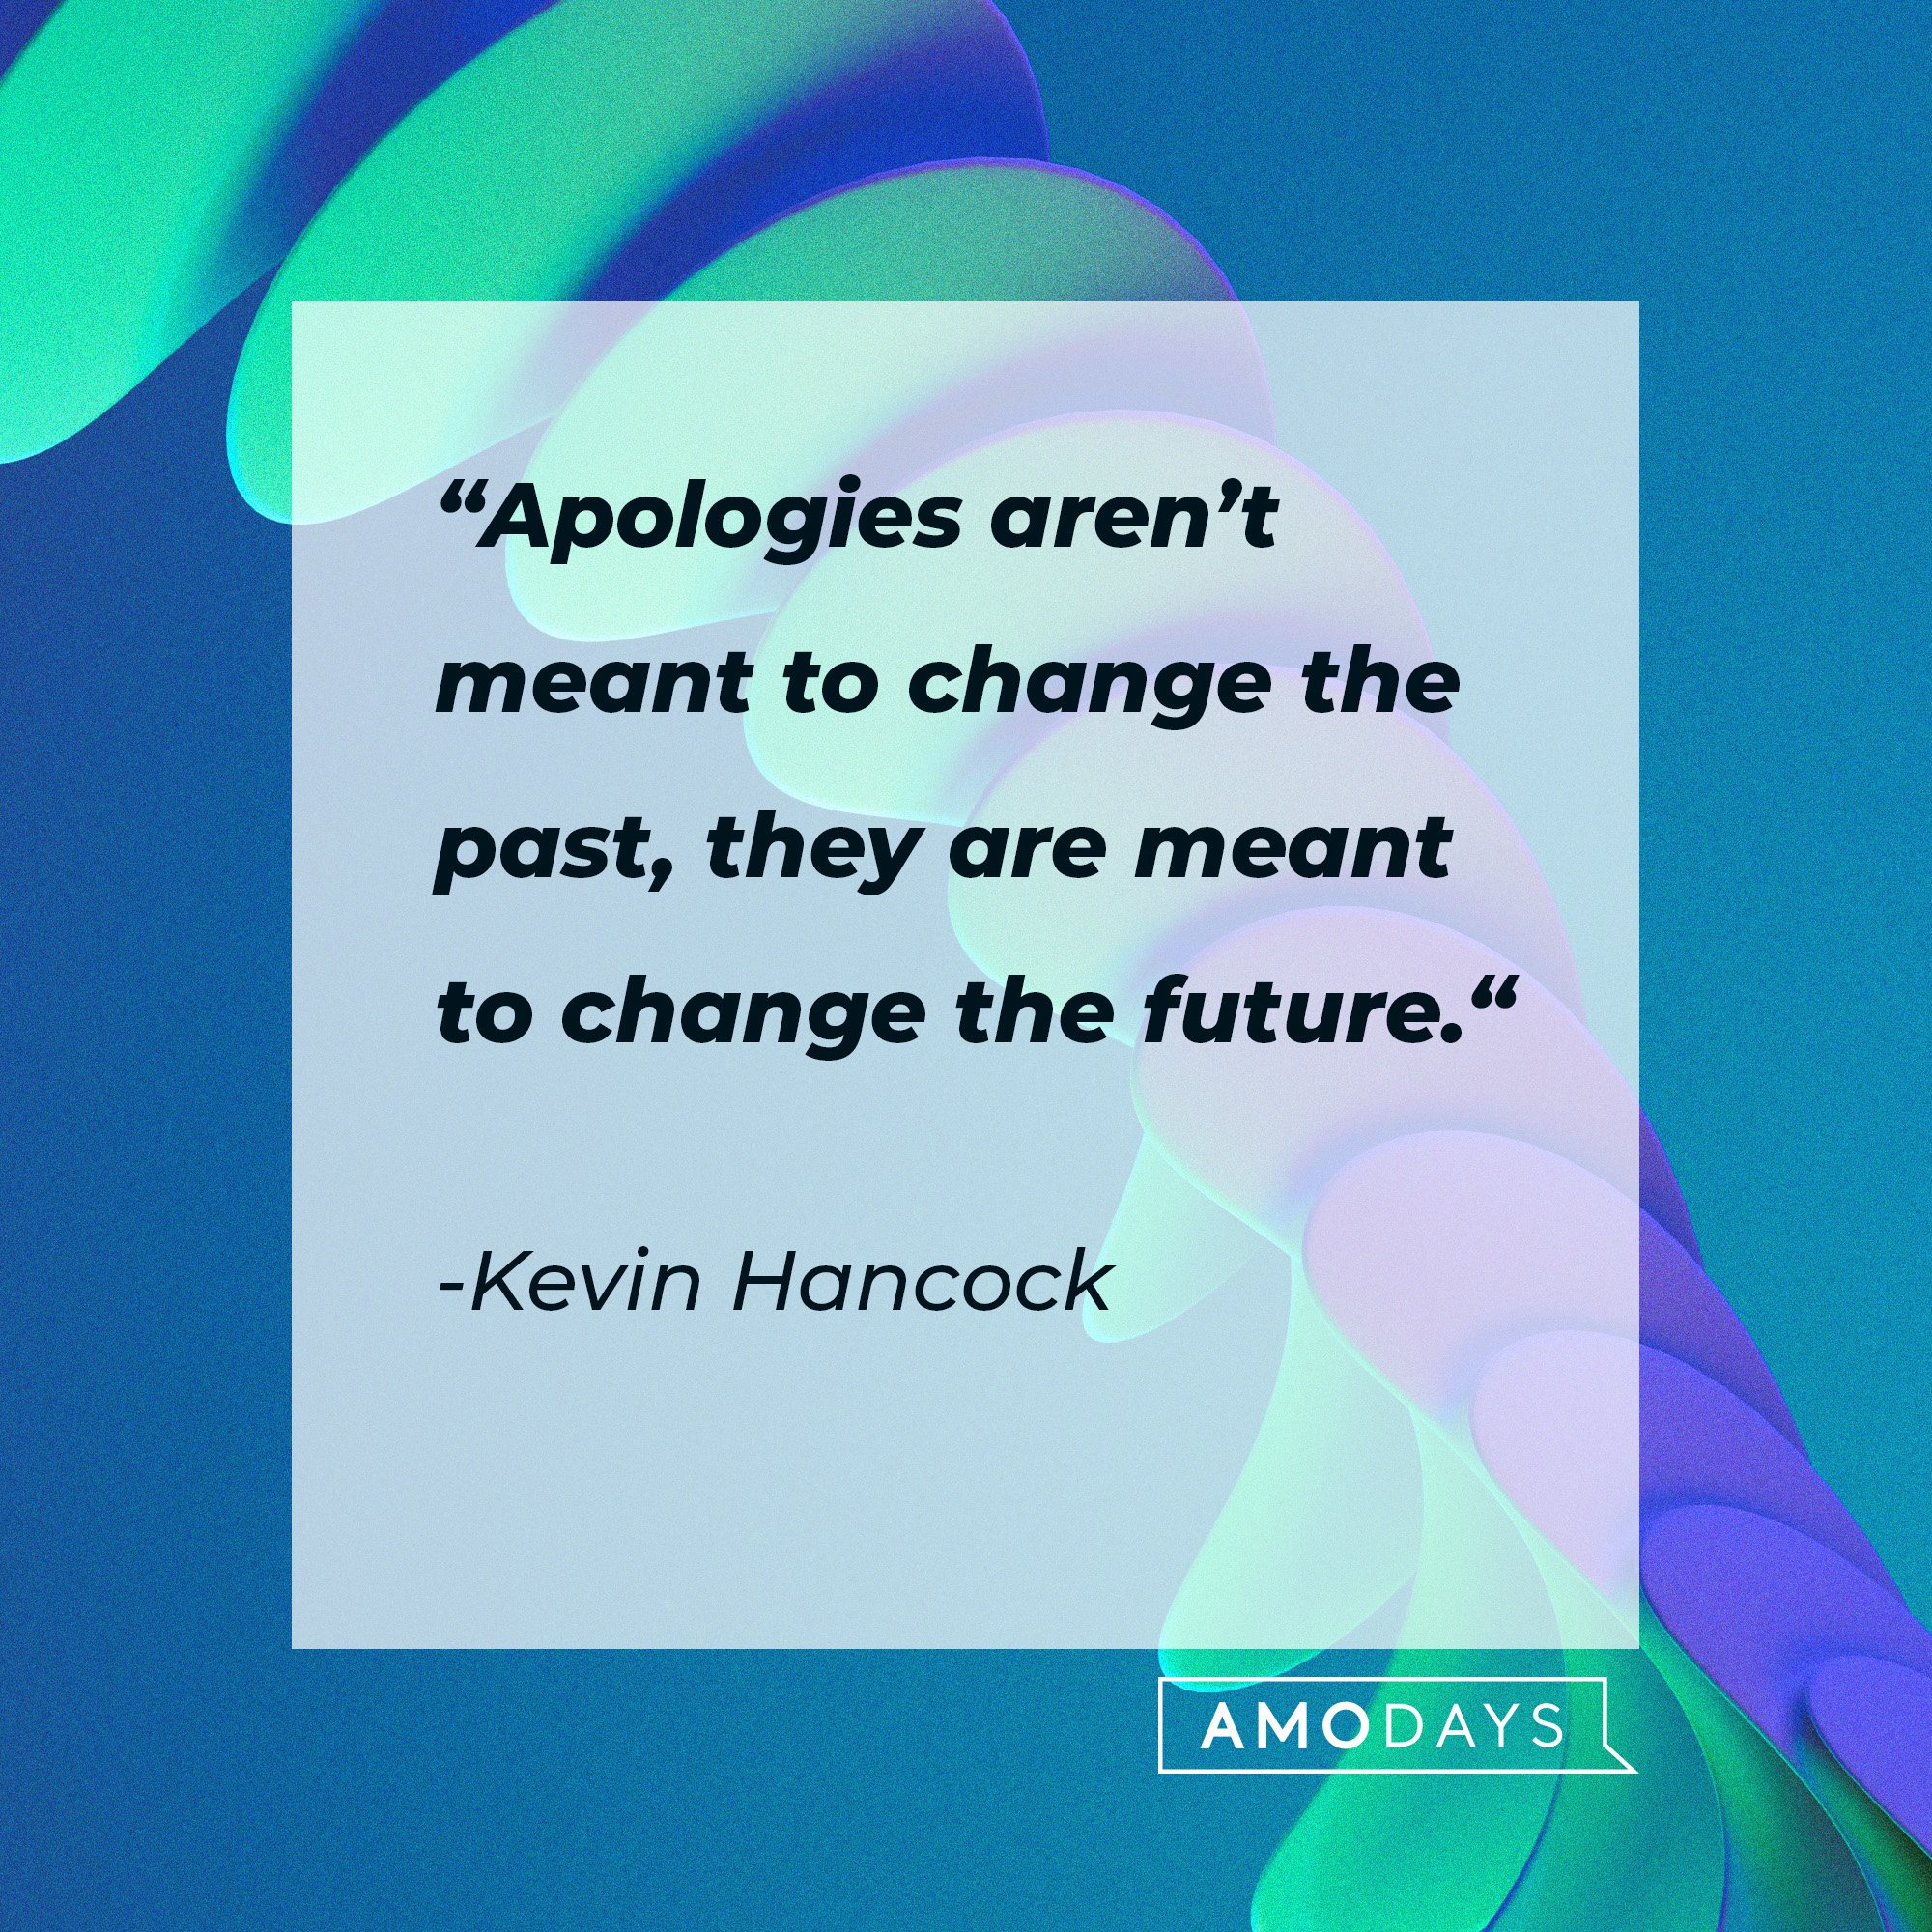  Kevin Hancock's quote: “Apologies aren’t meant to change the past, they are meant to change the future.“ | Image: AmoDays